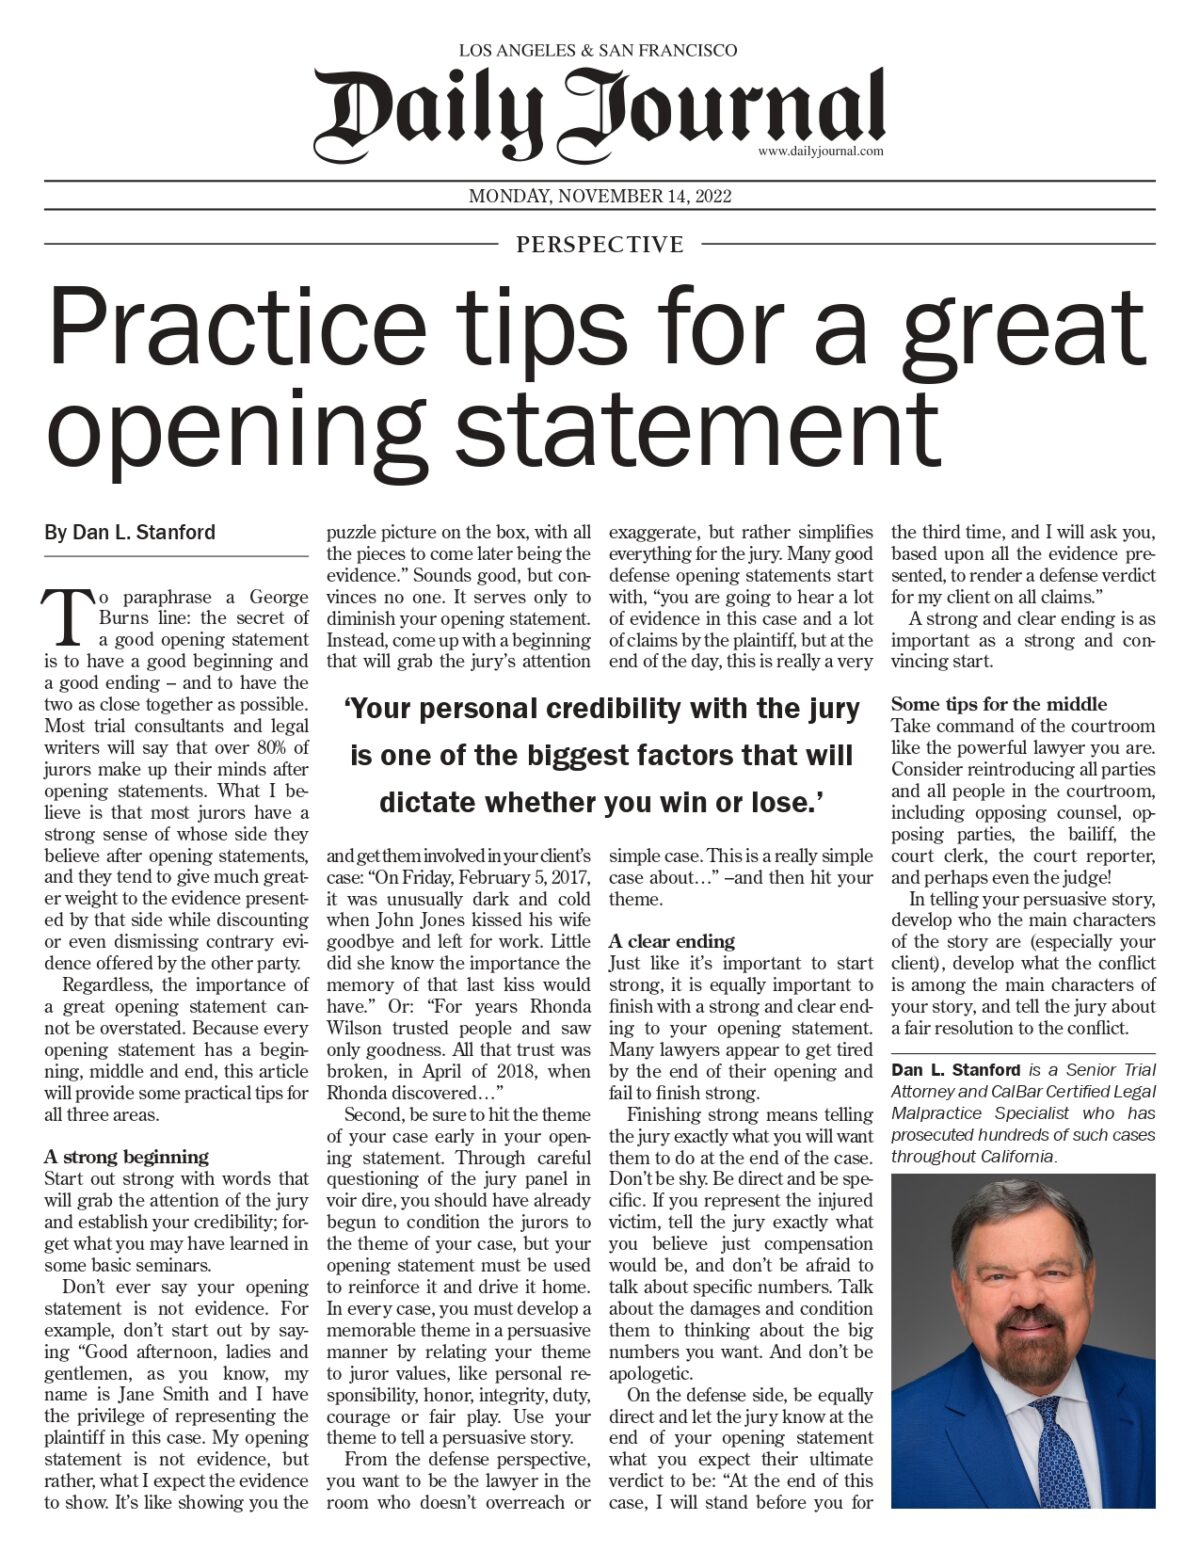 Practice tips for a great opening statement